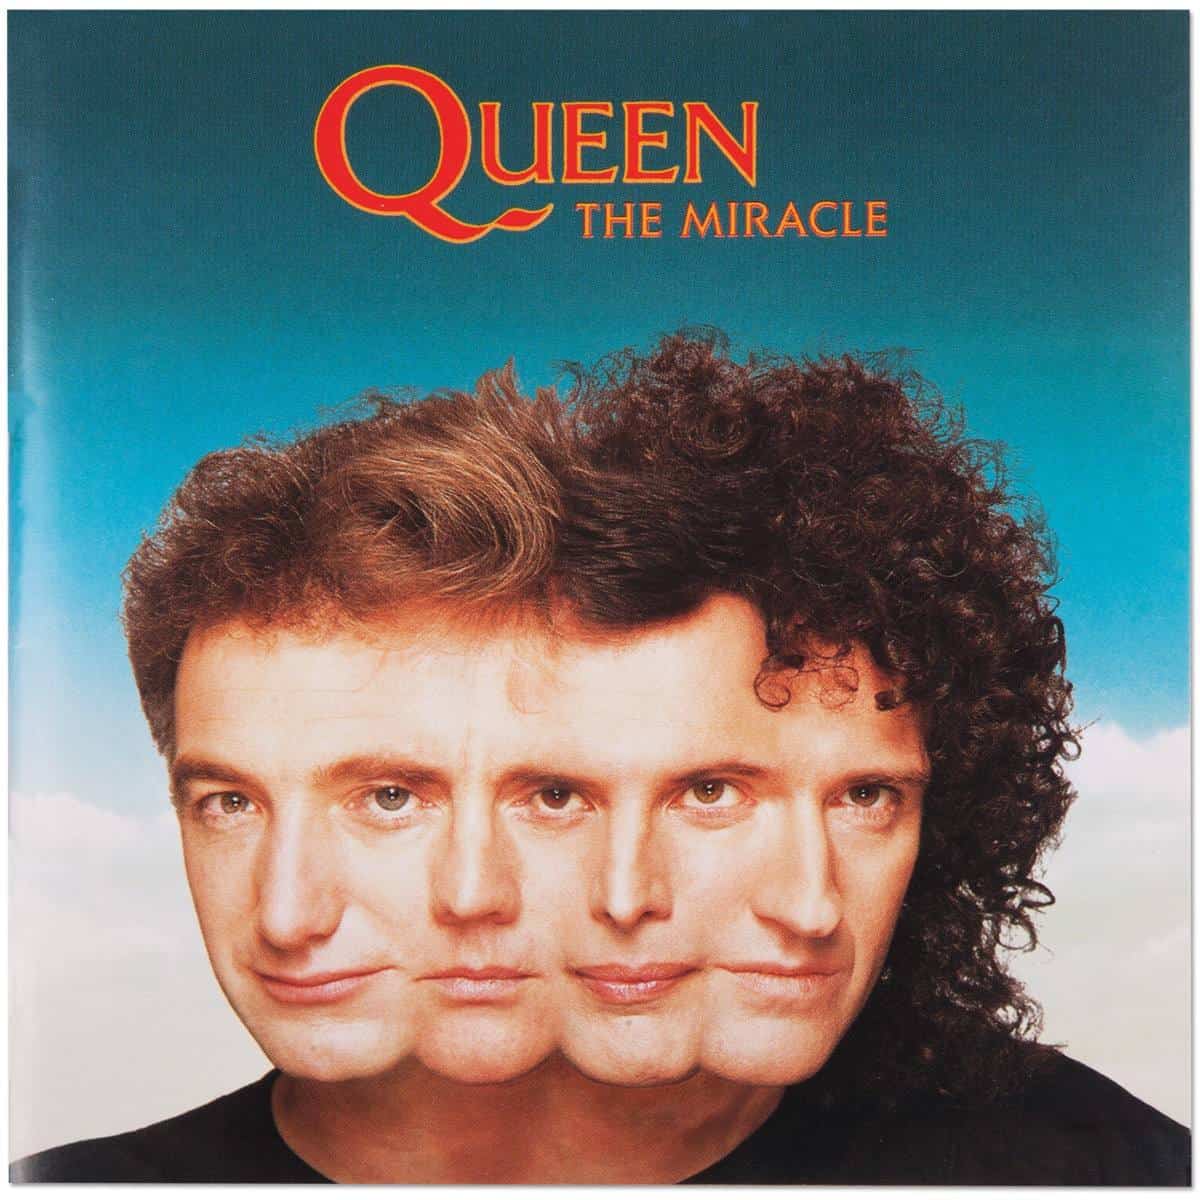 https://www.musicnotes.com/blog/content/images/now/wp-content/uploads/the-miracle-queen.jpg